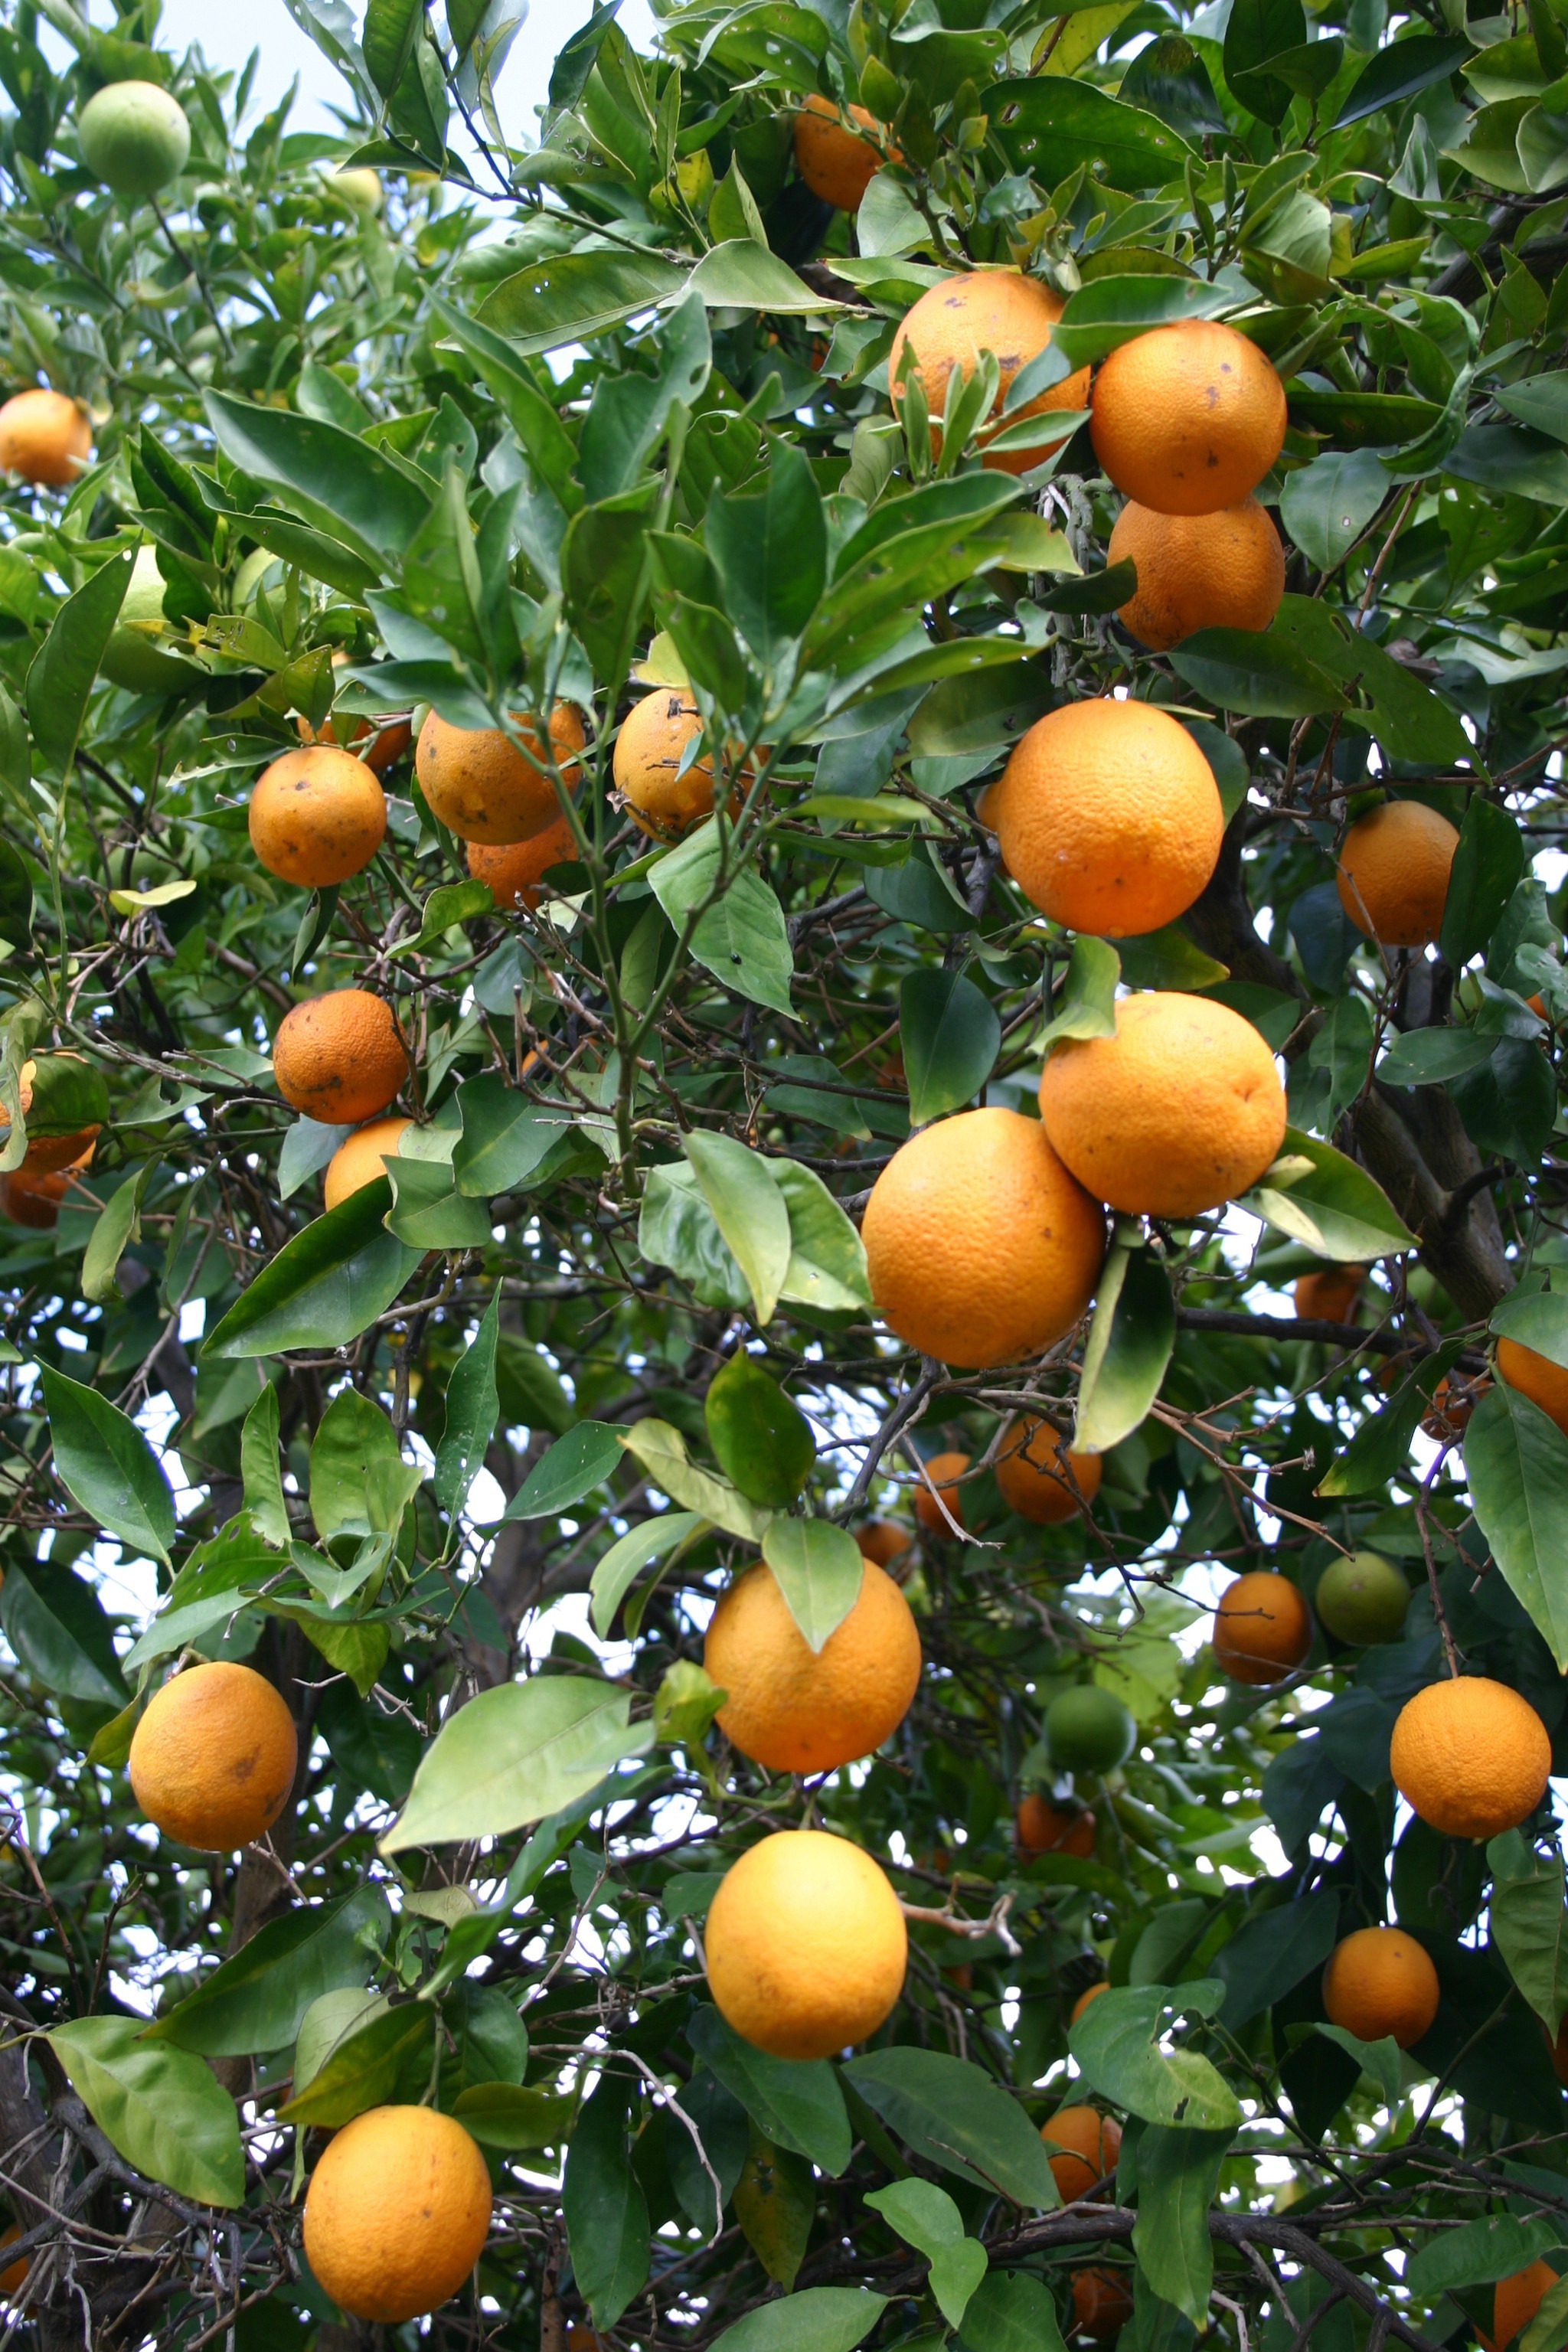 Navel orange production up but crop still 'manageable'